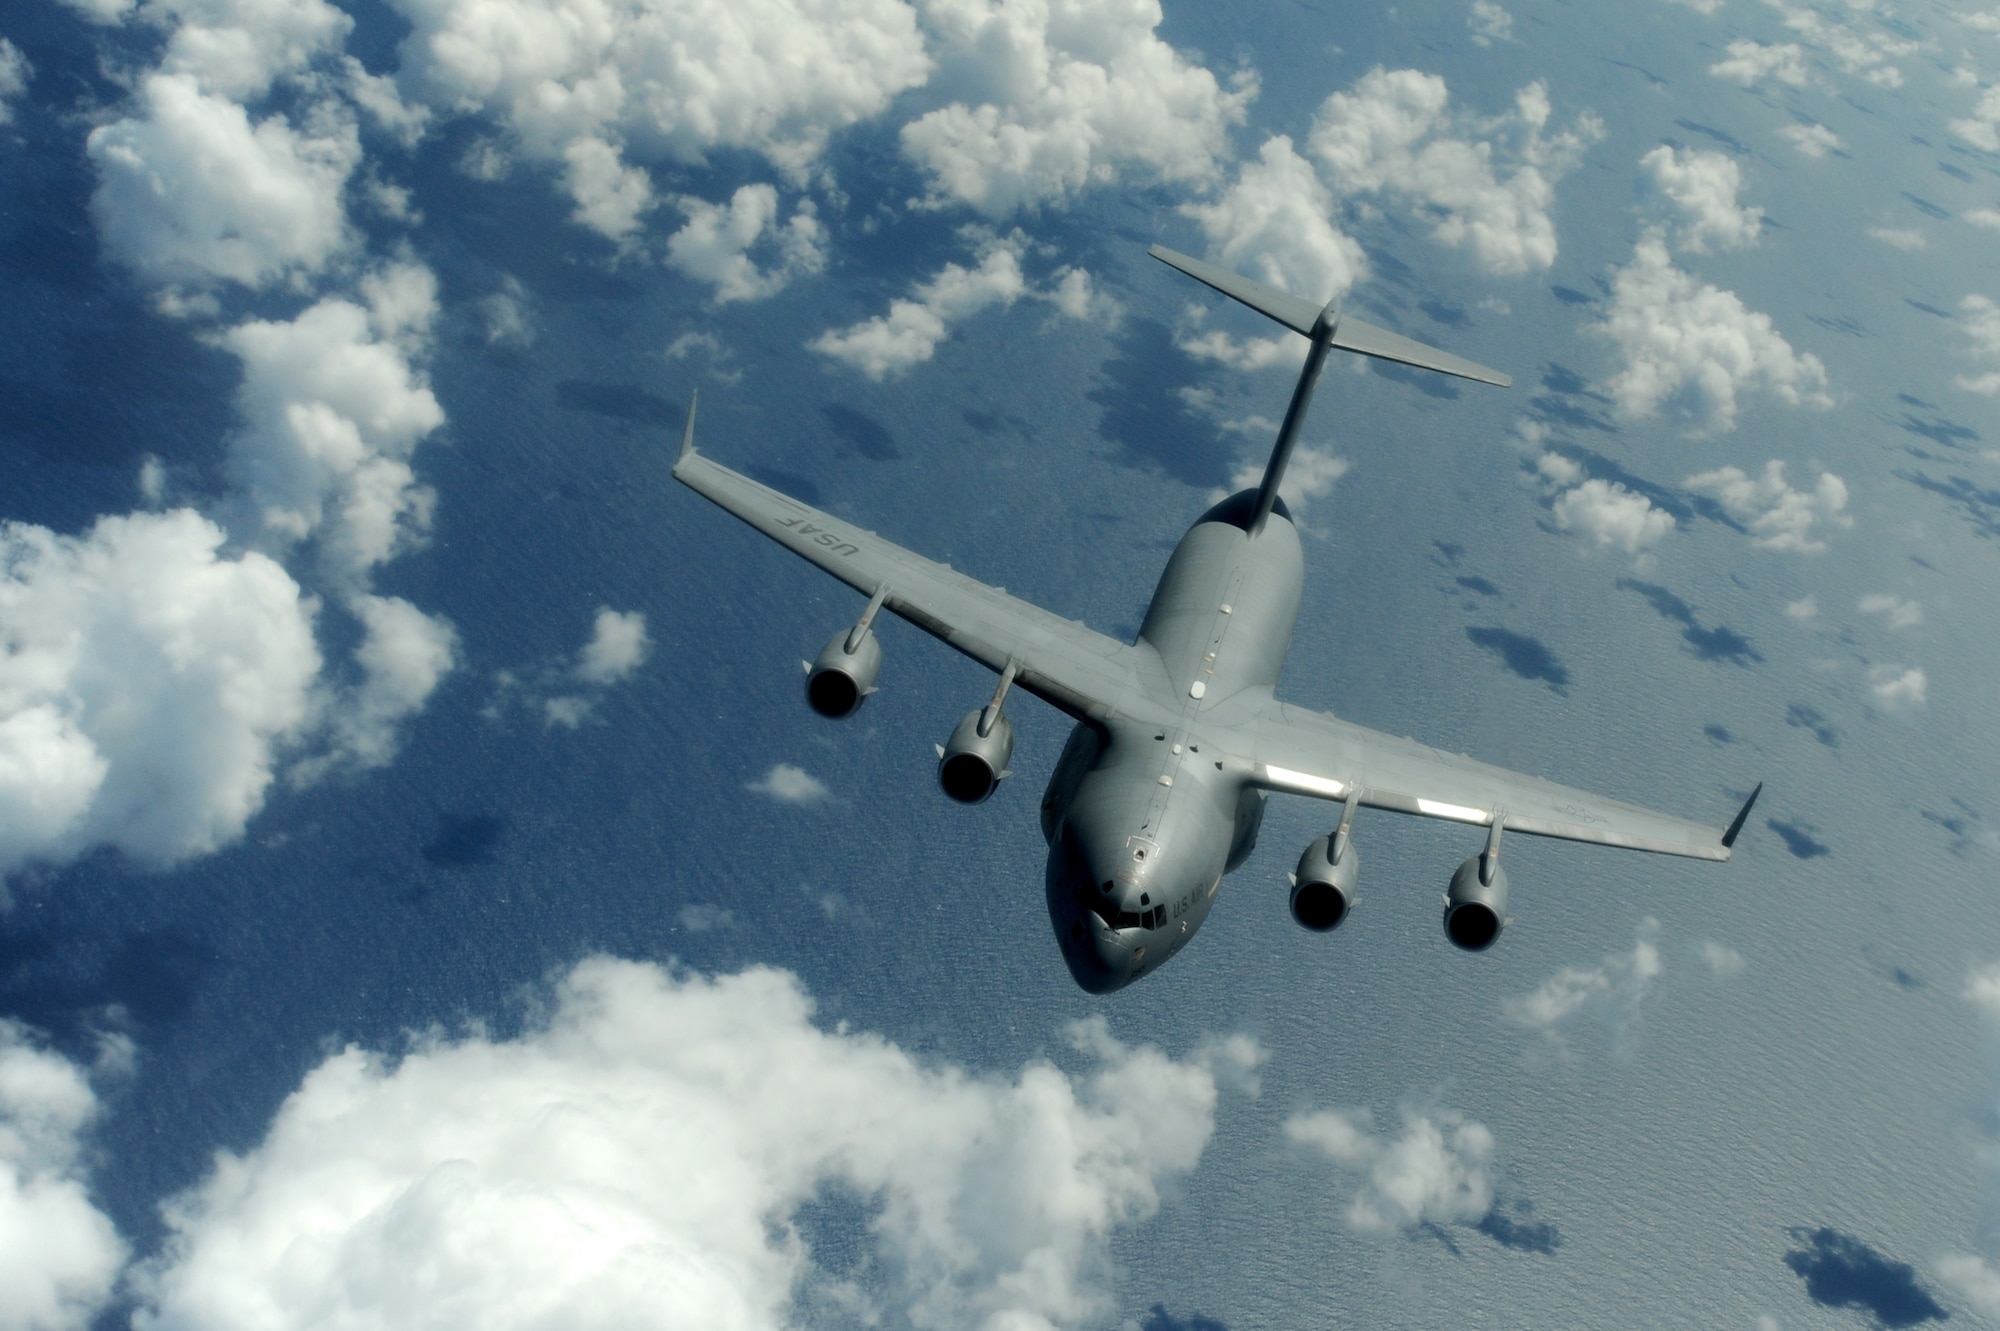 A C-17 Globemaster III from the 15th Wing, Joint Base Pearl Harbor Hickam, takes on fuel from a Hawaii Air National Guard 204th Air Refueling Squadron KC-135 Stratotanker during a mission to Andersen Air Base, Guam. C-17 crews like this one sometimes perform Aeromedical evacuations in the Pacific theater requiring coordination across many operational and medical disciplines. (U.S. Air Force photo/Staff Sgt. Mike Meares)